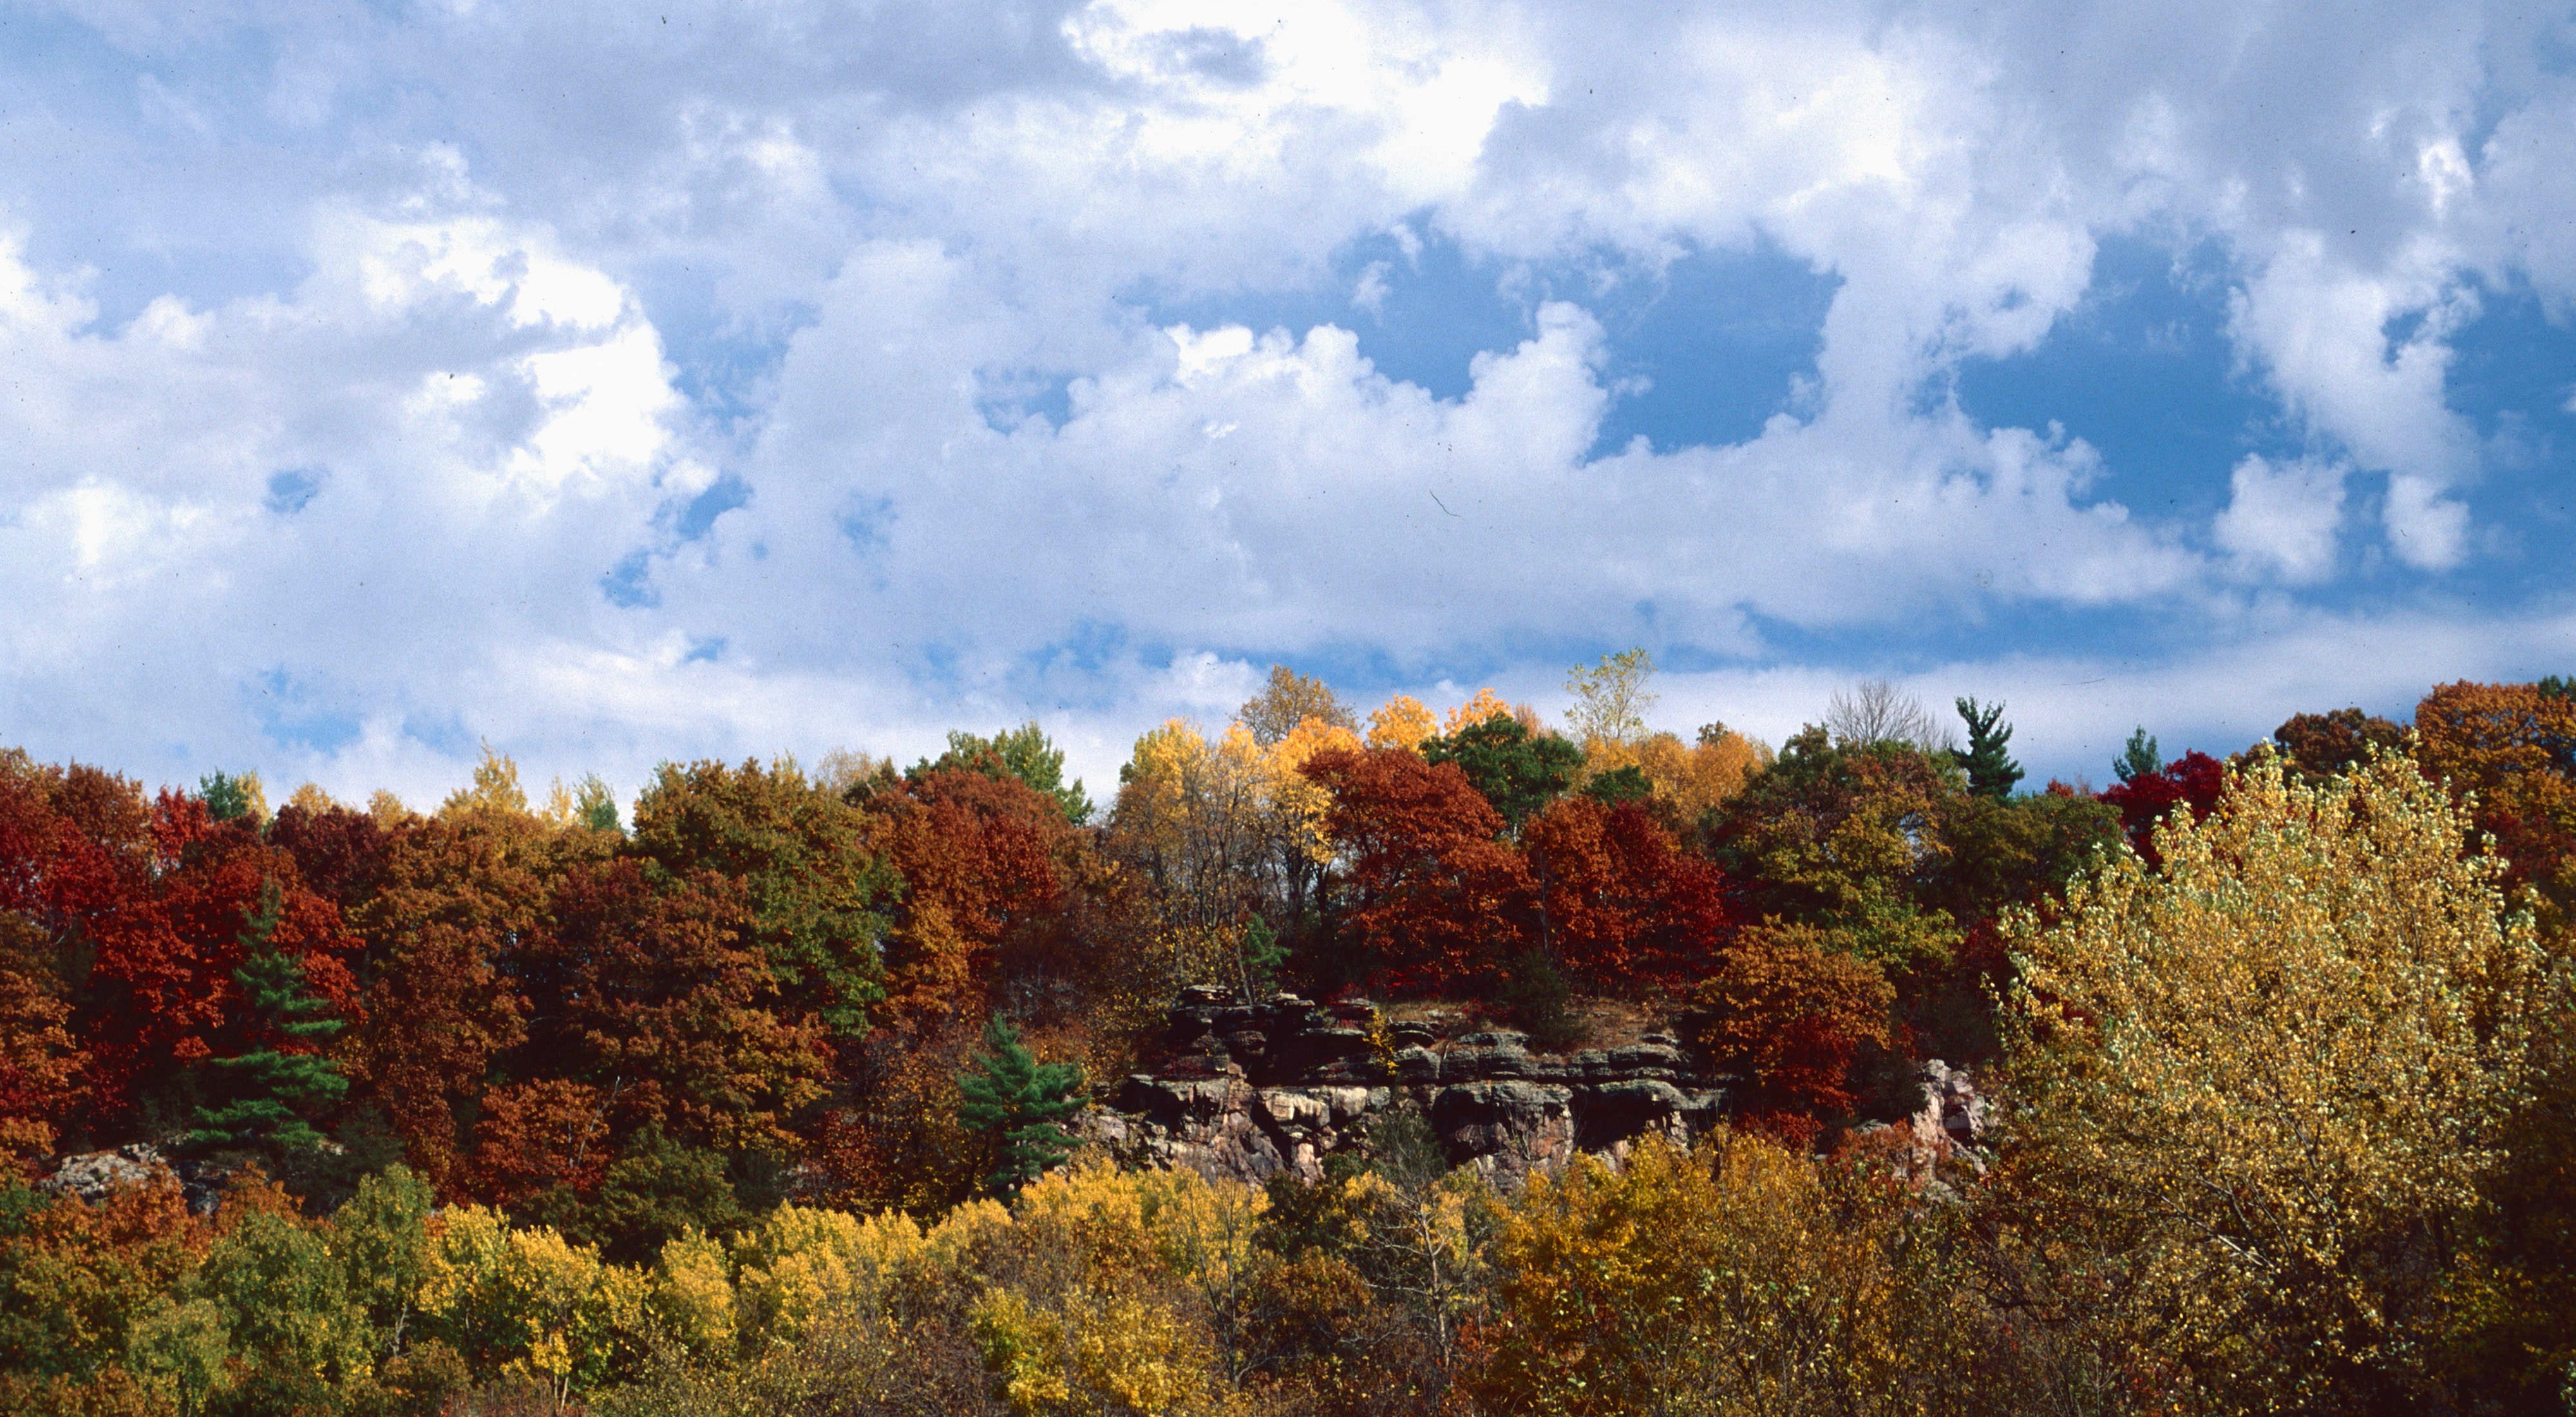 A rocky bluff stands out among the red, yellow and orange leaves on the trees at Ableman’s Gorge with blue sky and puffy white clouds overhead.